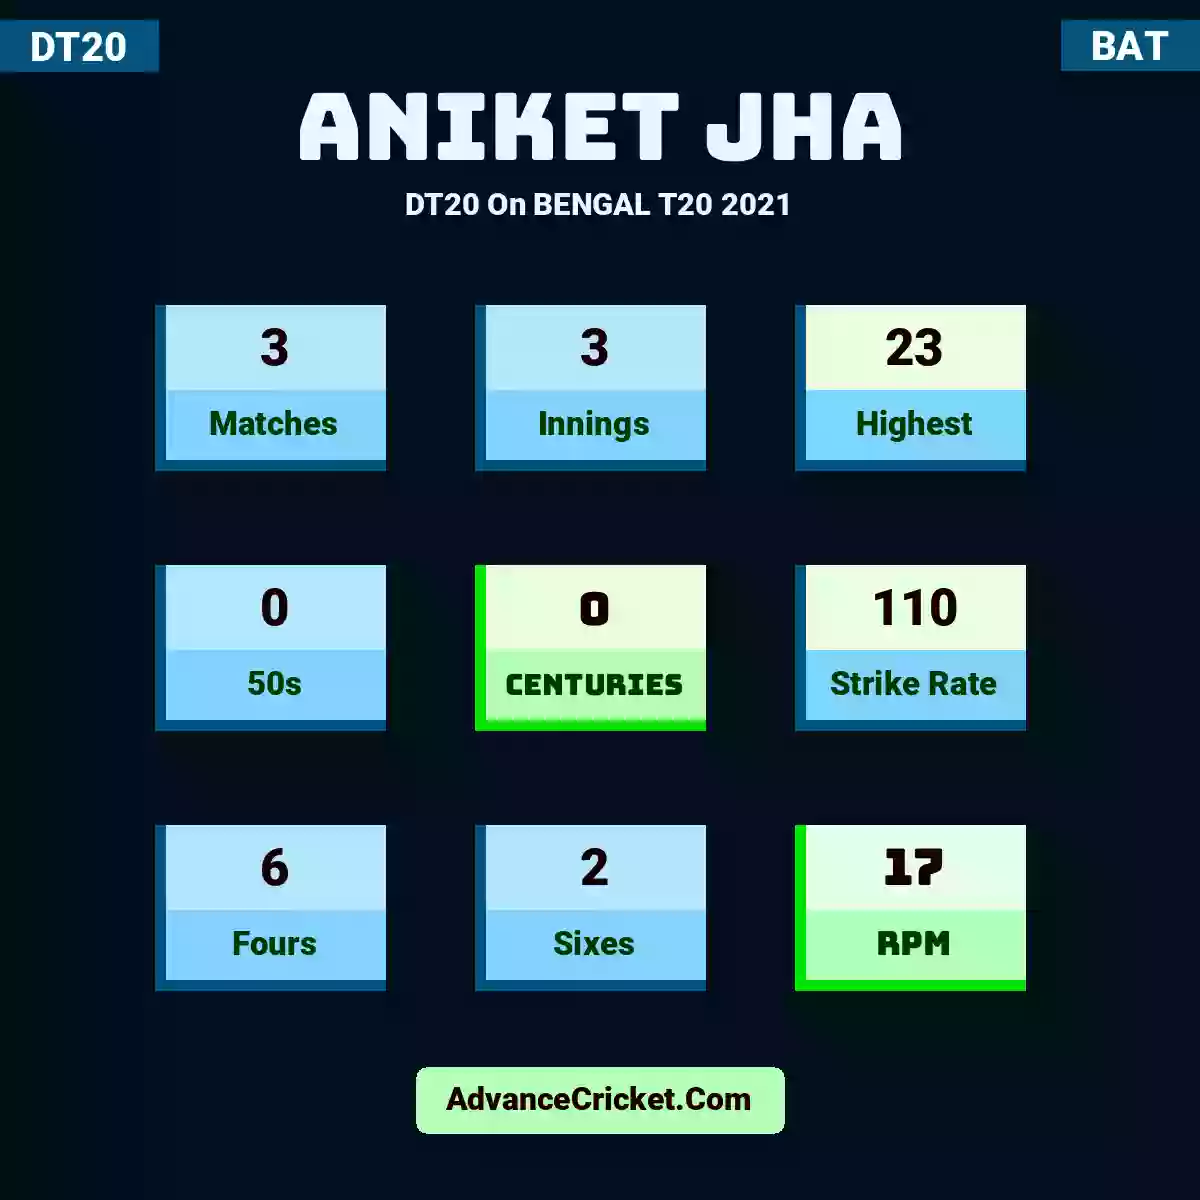 Aniket Jha DT20  On BENGAL T20 2021, Aniket Jha played 3 matches, scored 23 runs as highest, 0 half-centuries, and 0 centuries, with a strike rate of 110. A.Jha hit 6 fours and 2 sixes, with an RPM of 17.